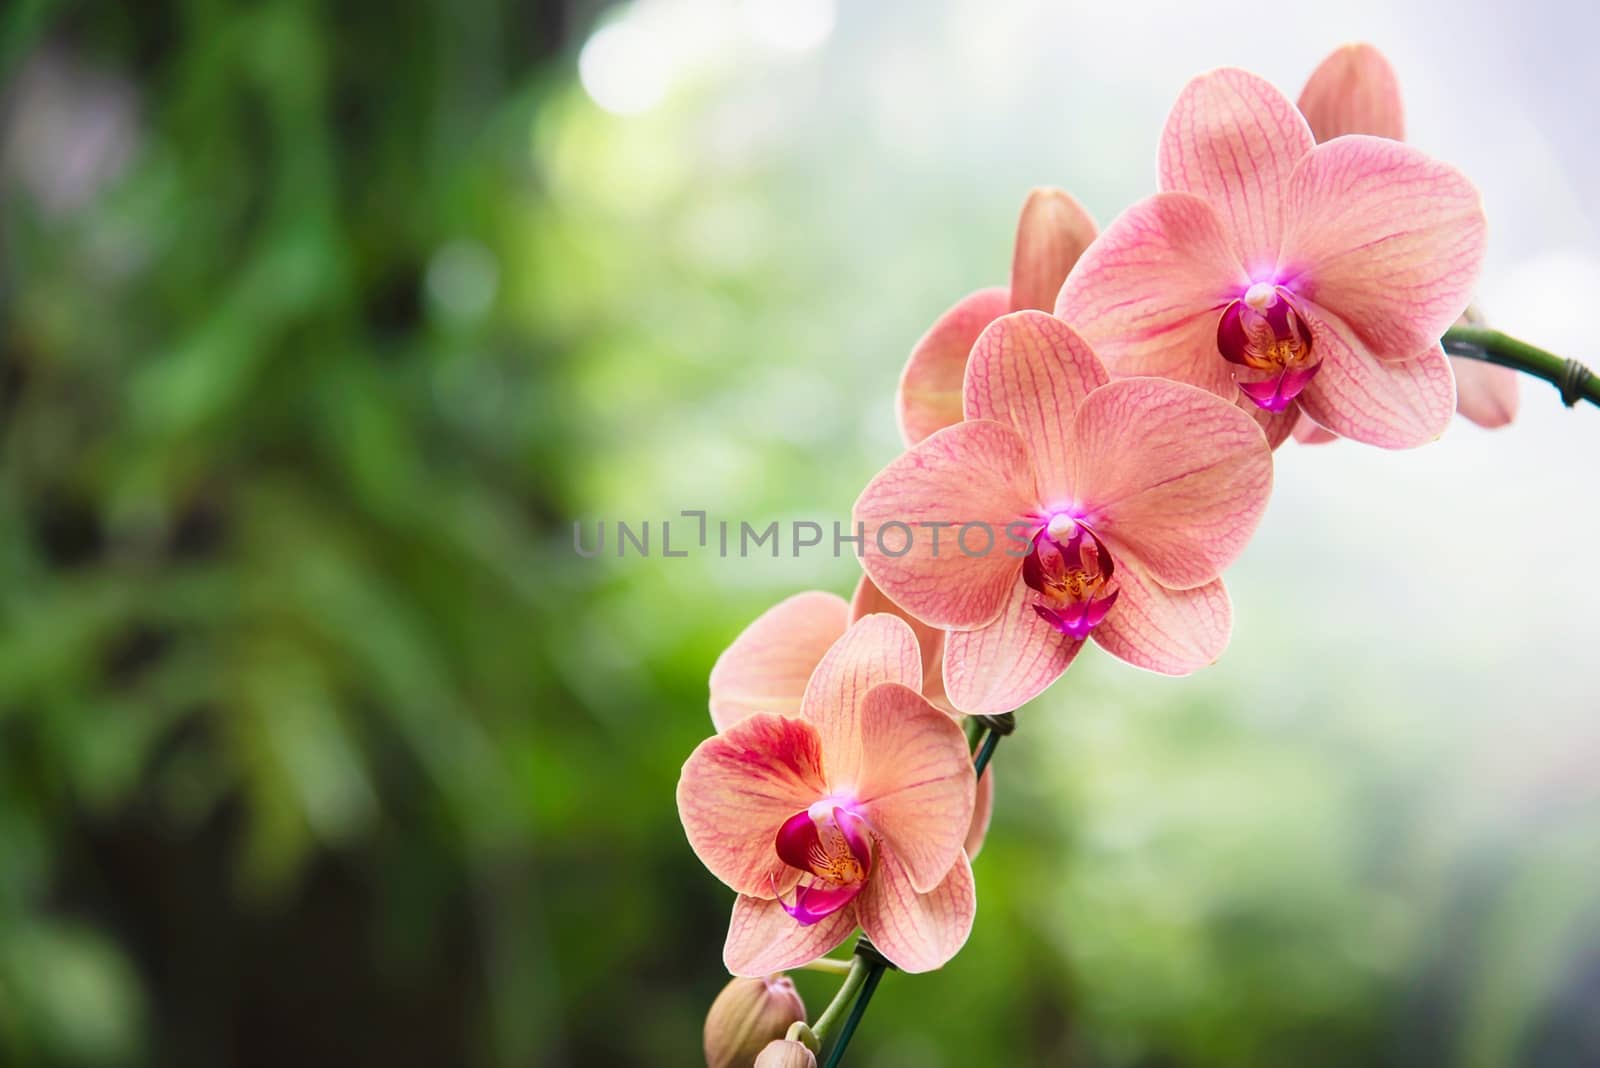 Light orange orchid with green leaf background - beautiful nature flower blossom concept